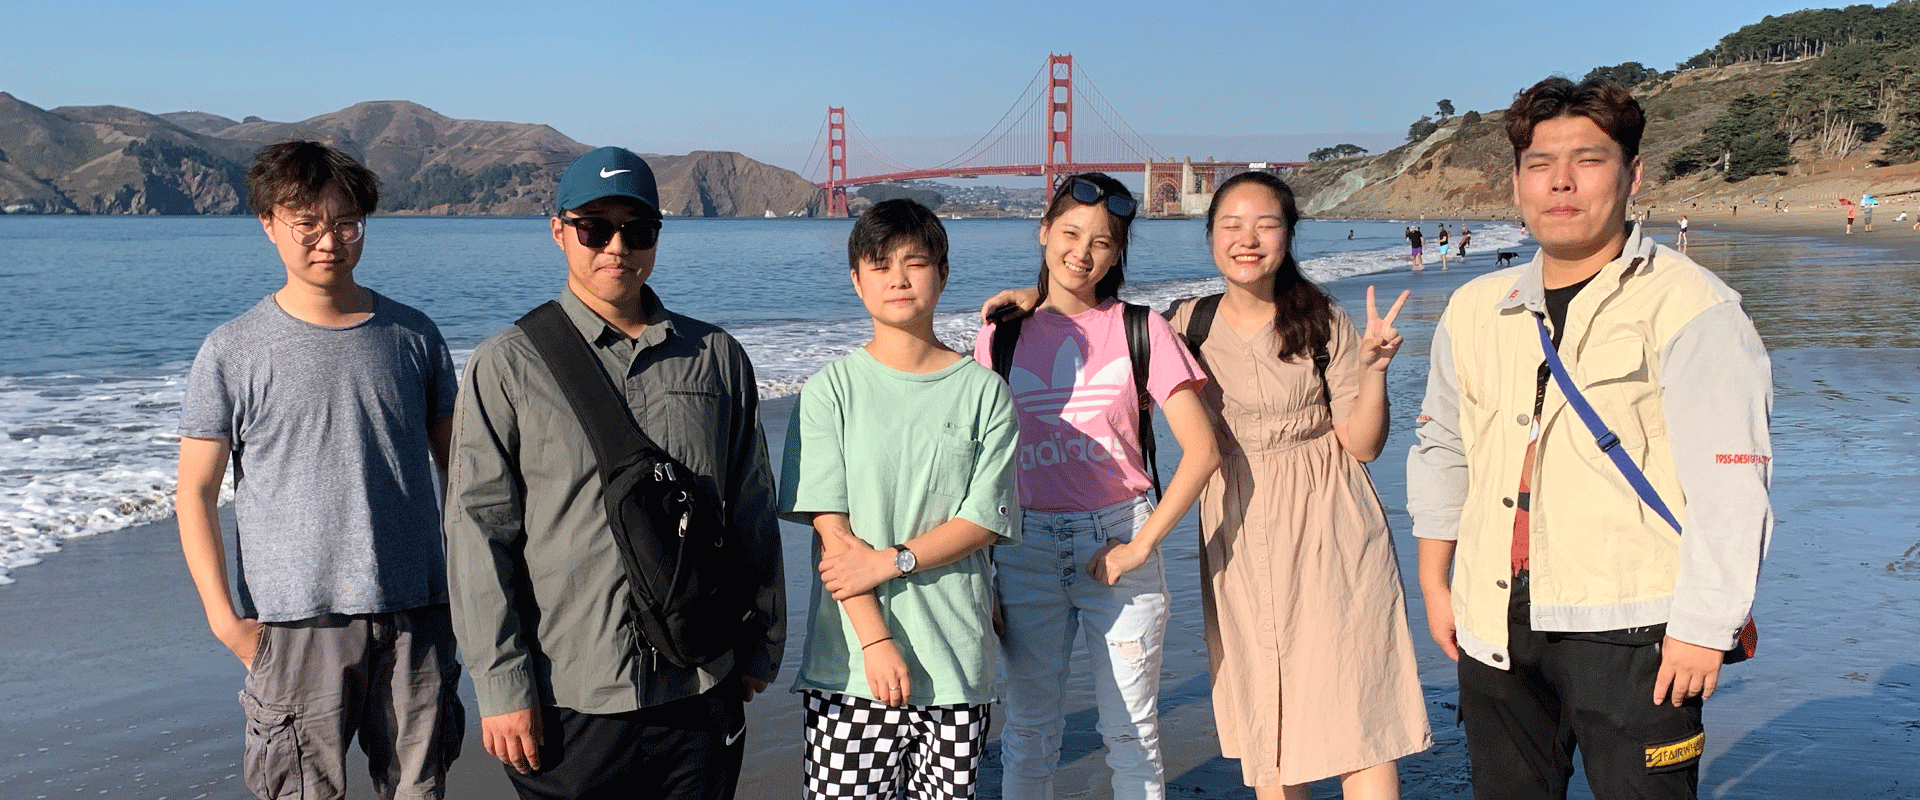 International Students at the beach, with the Golden Gate Bridge behind them